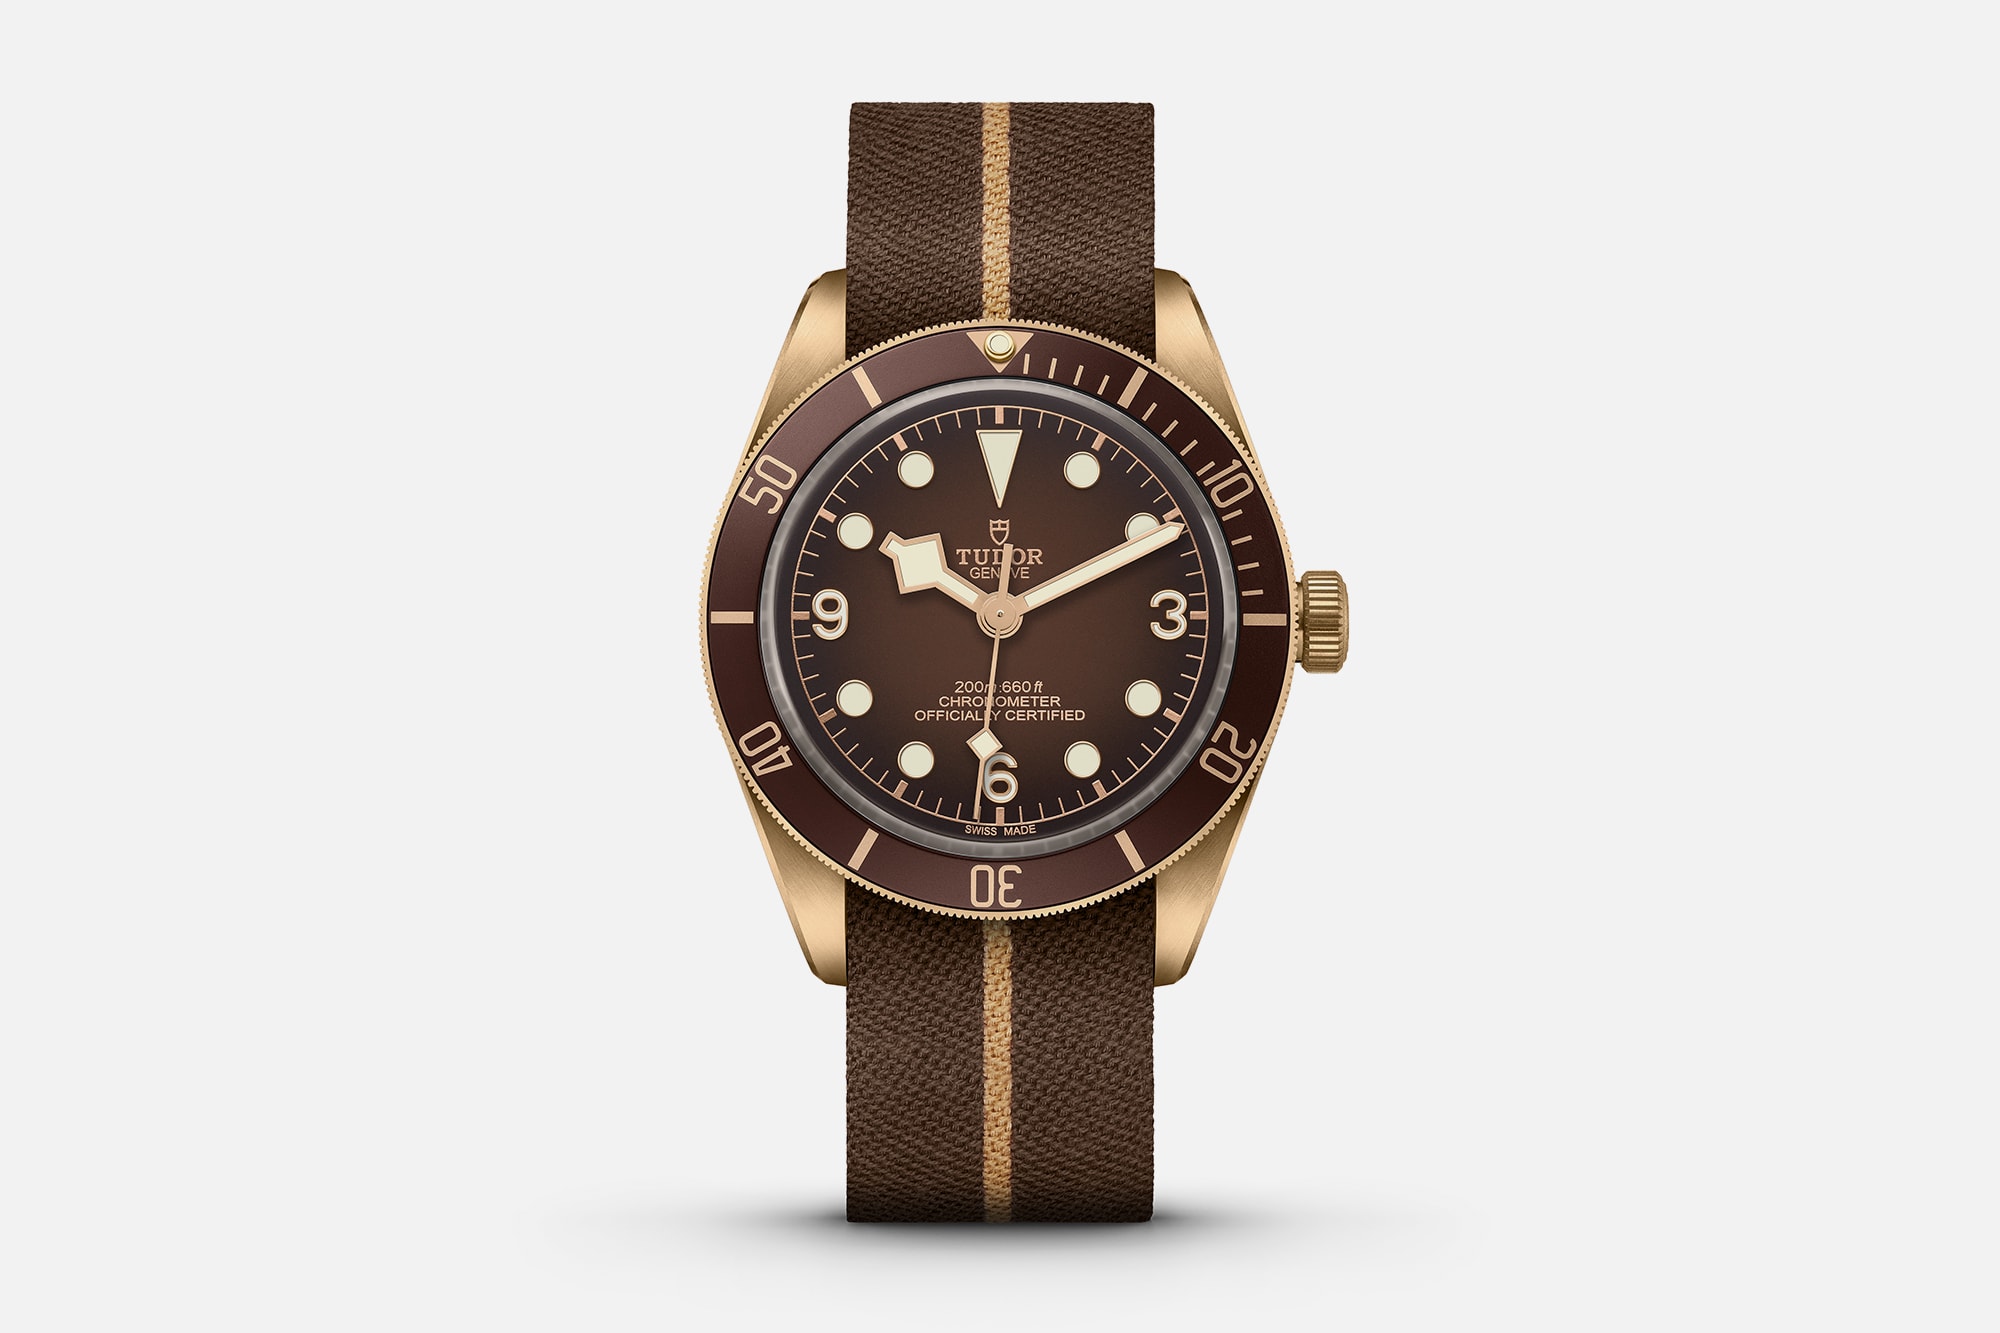 Introducing the Tudor Black Bay Fifty-Eight Bronze, a Boutique Exclusive